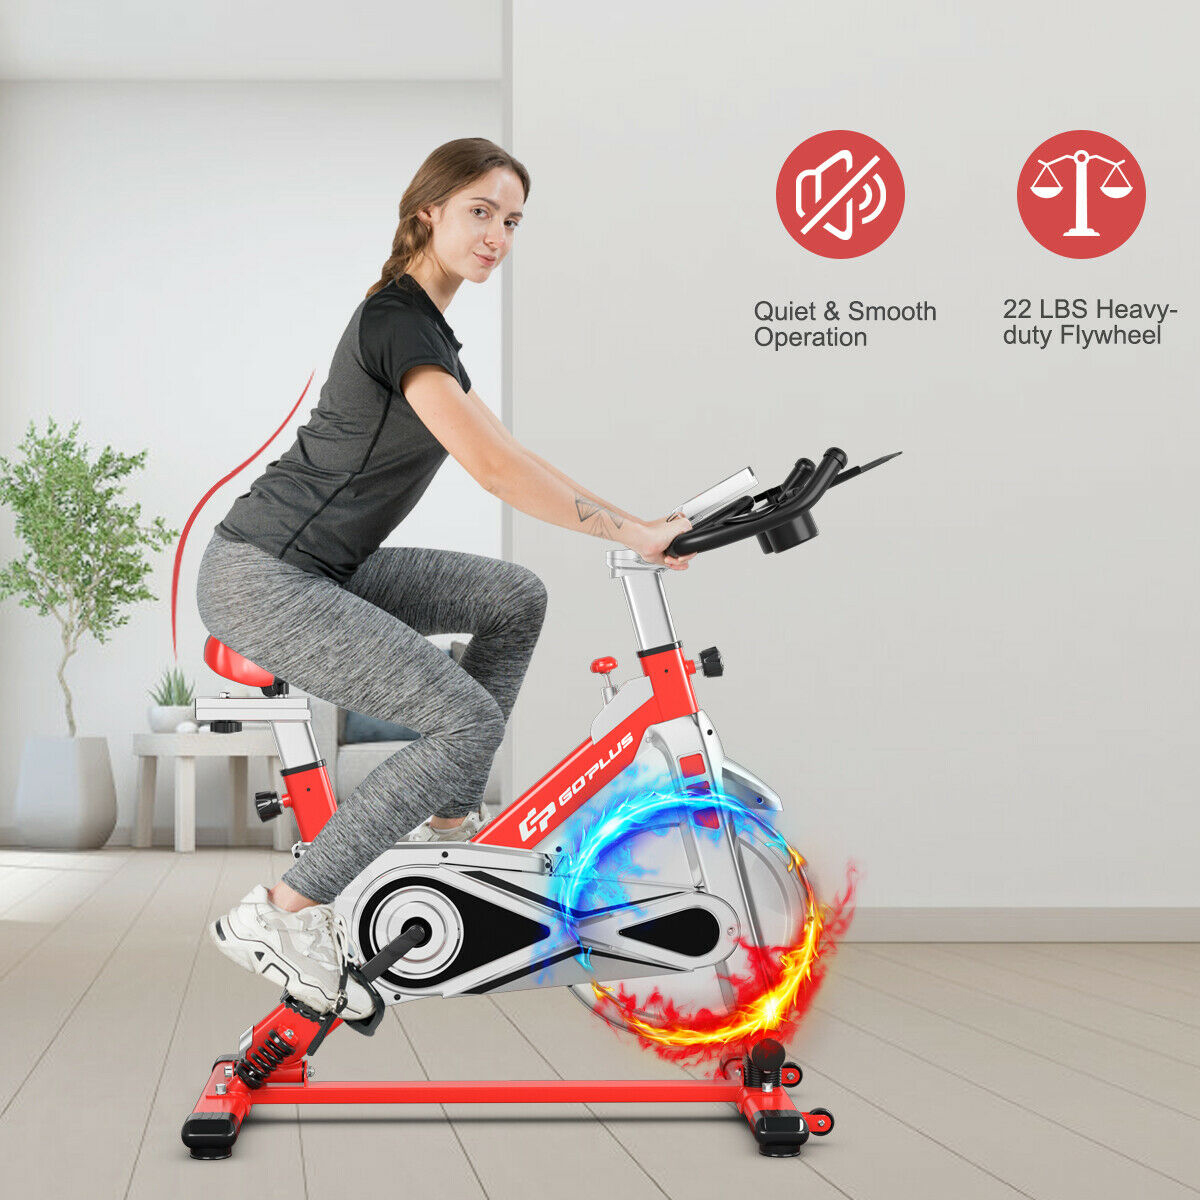 Costway Goplus Indoor Stationary Exercise Cycle Bike Bicycle Workout w/ Large Holder Red